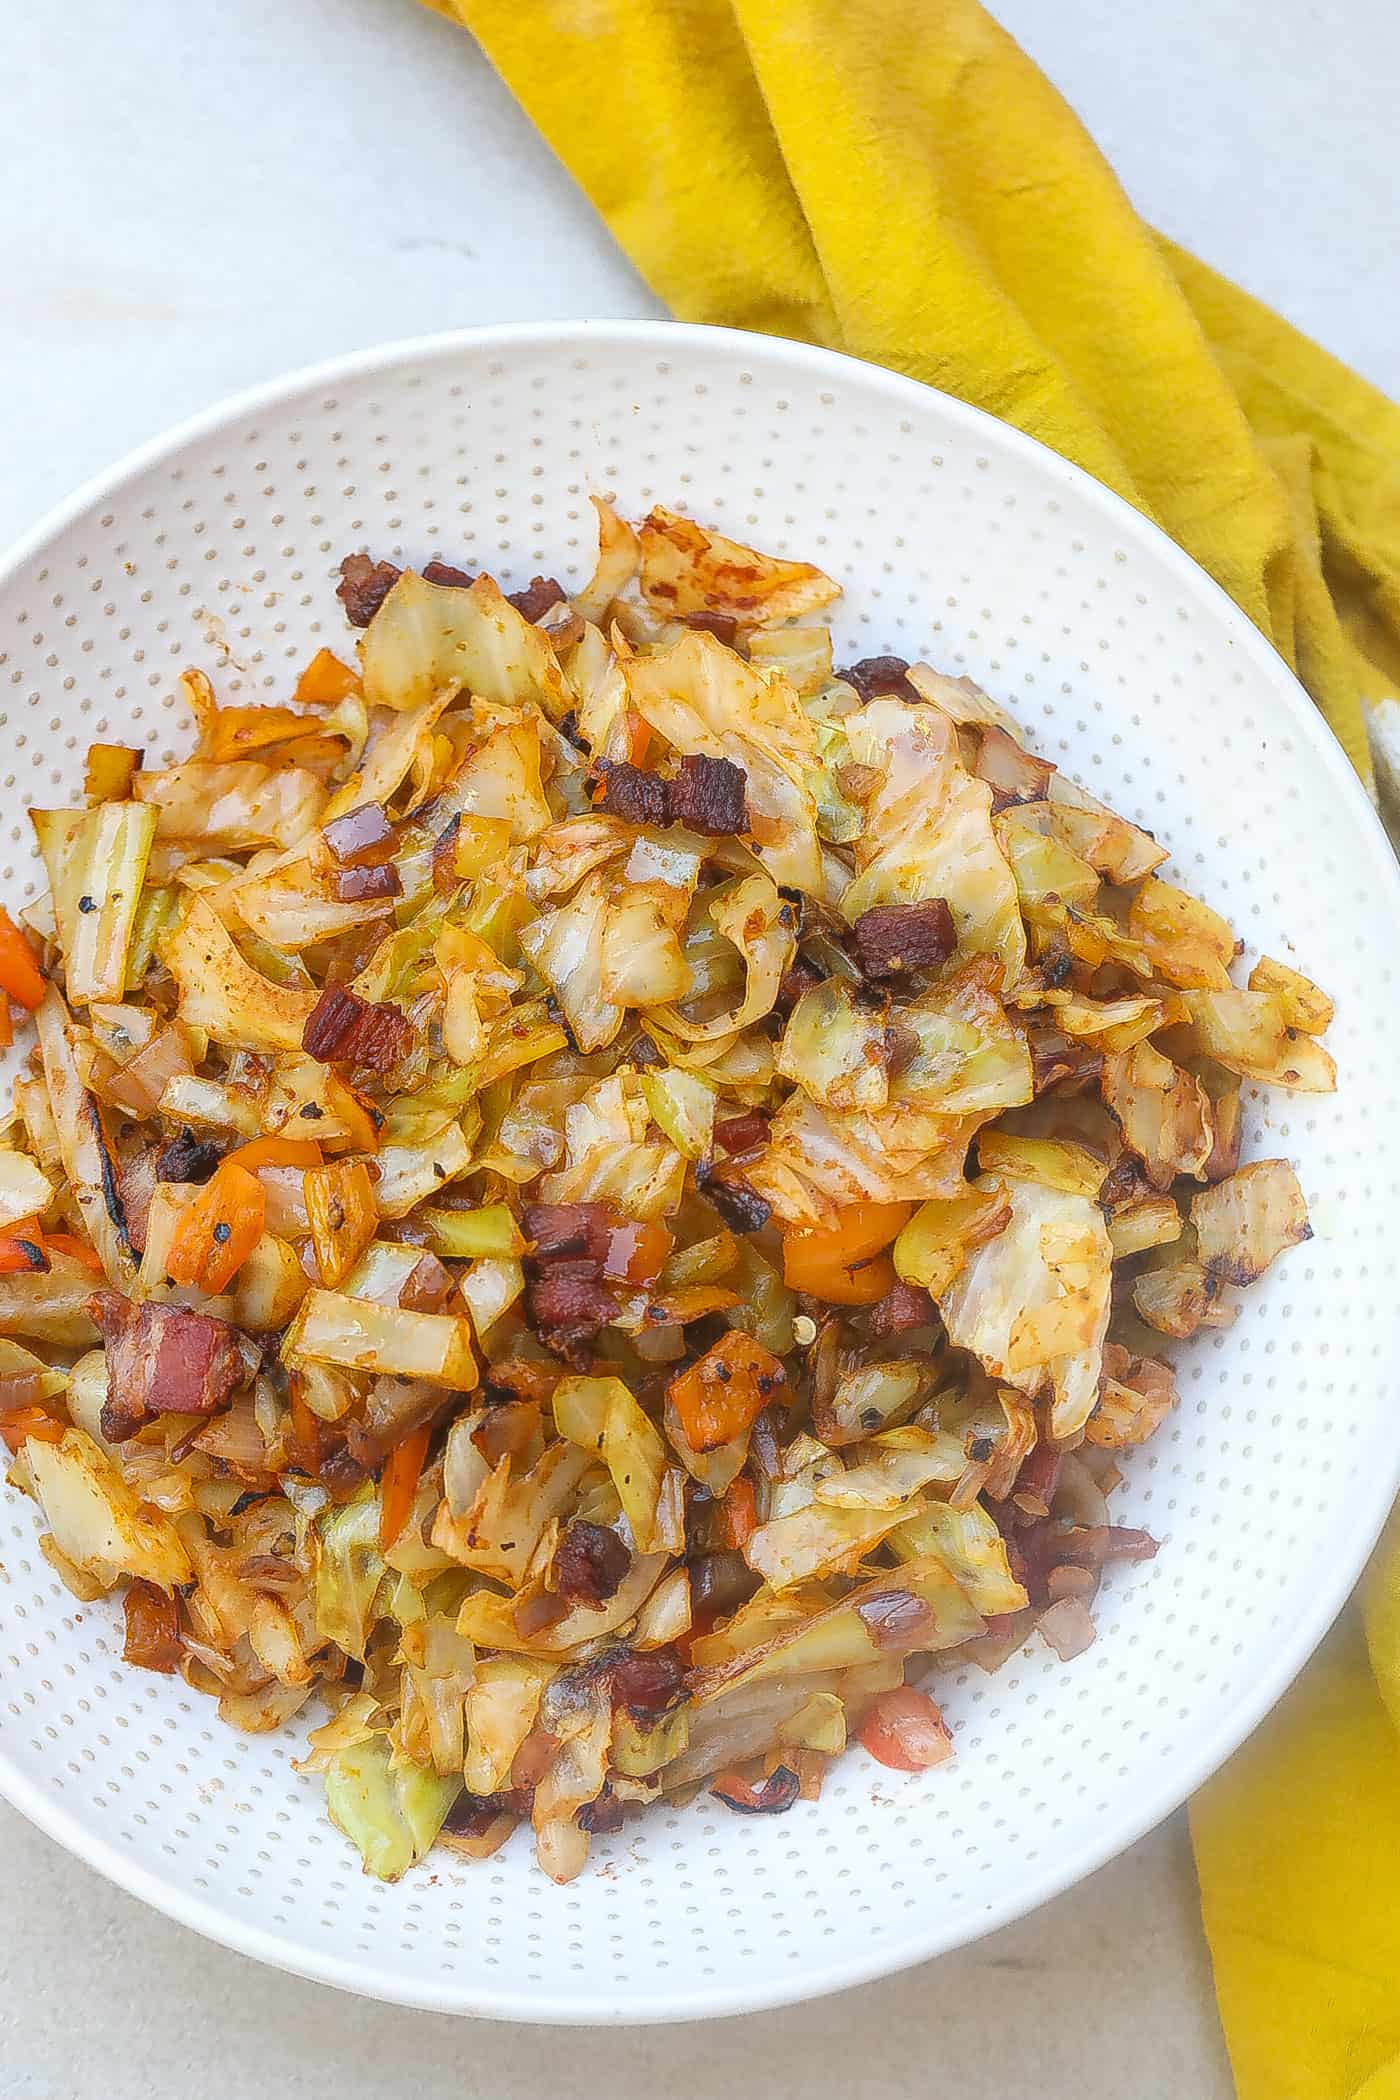 Fried cabbage and bacon on a white plate